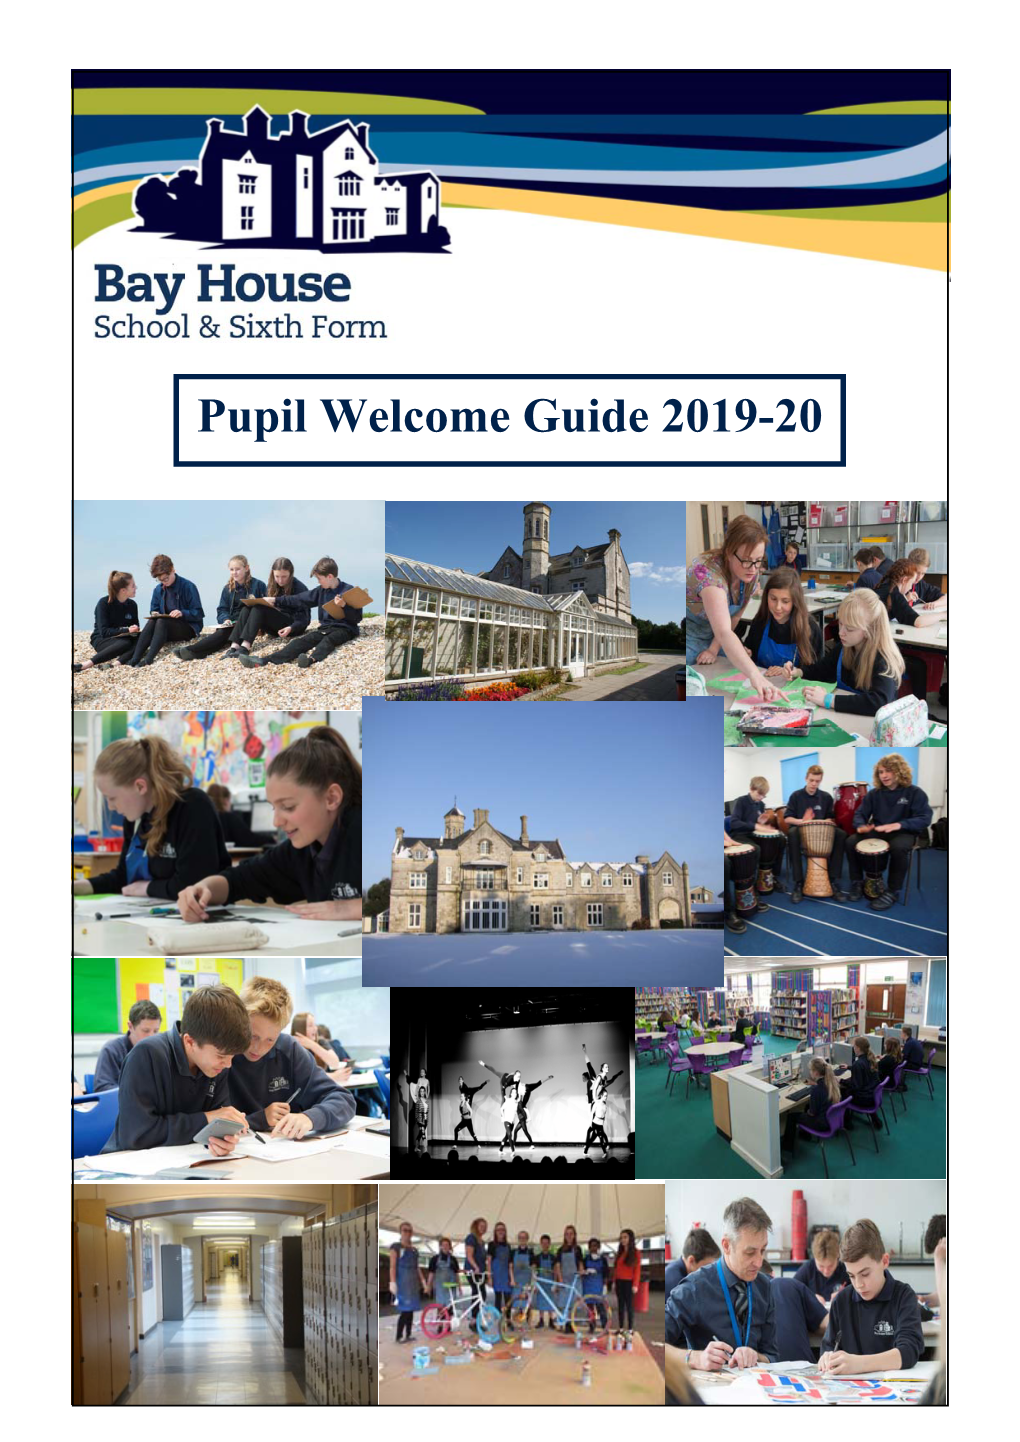 Pupil Welcome Guide 2019-20